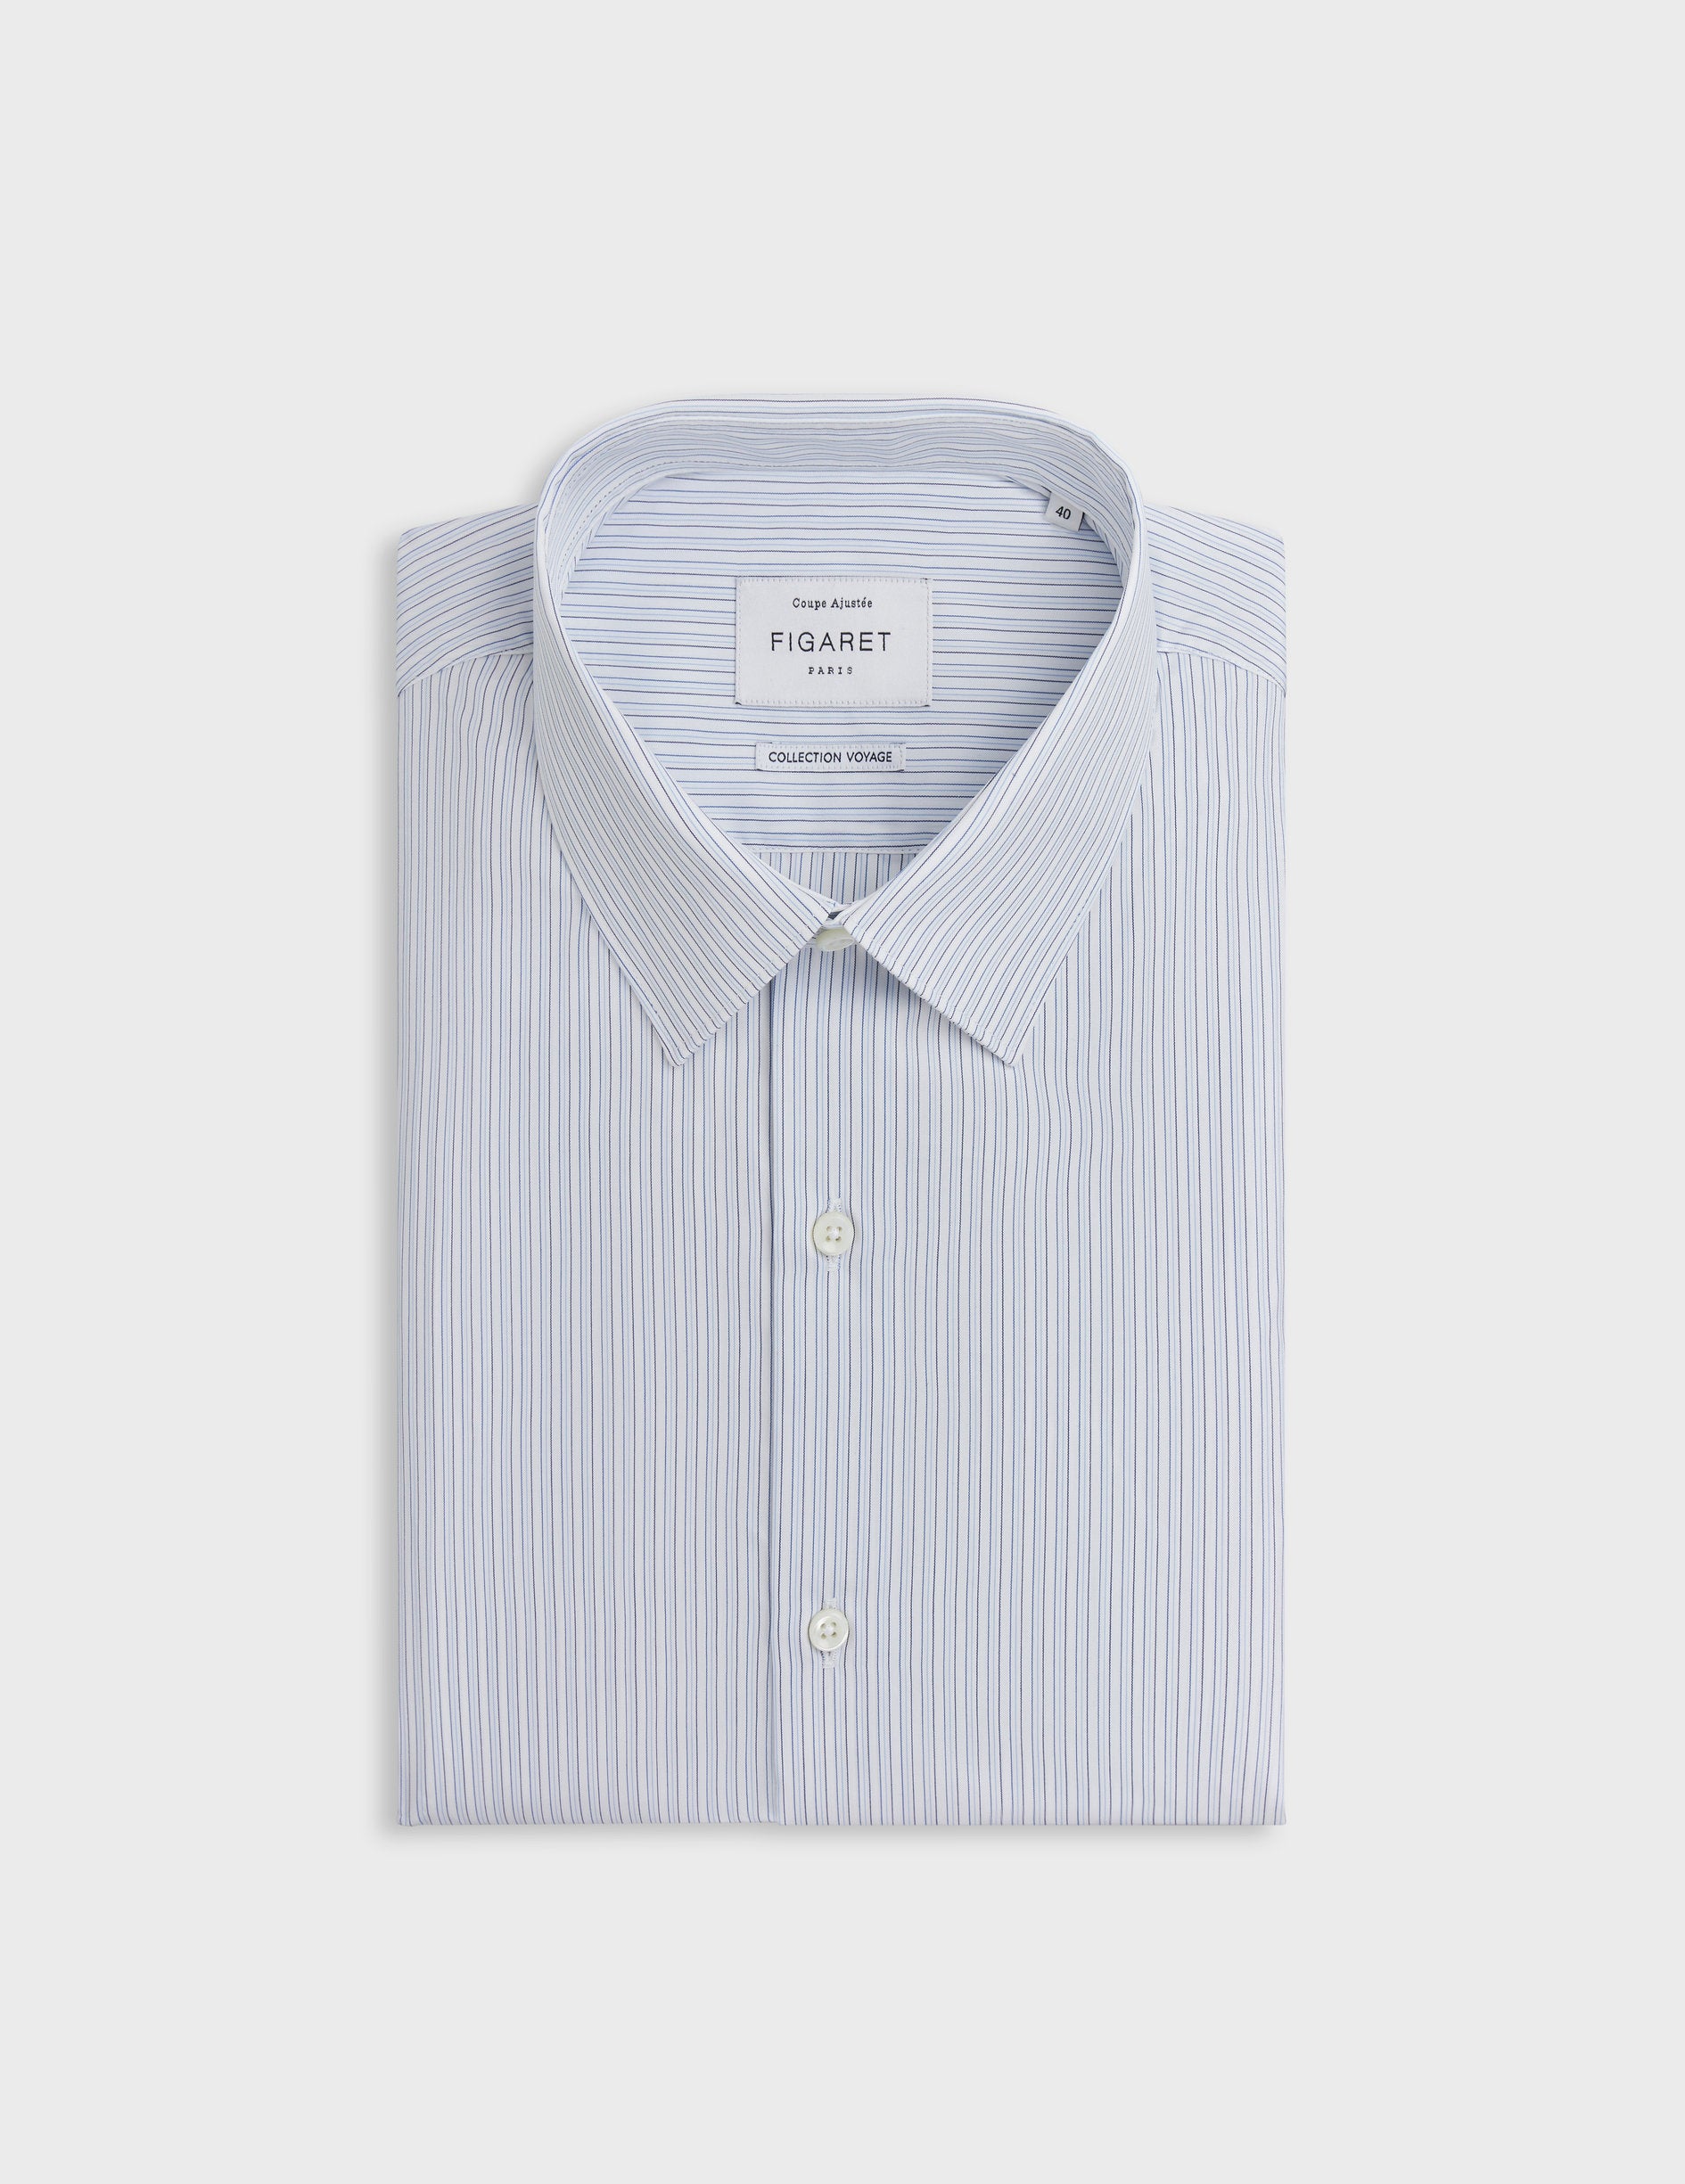  fitted blue striped  wrinkle-free shirt - Poplin - Figaret Collar